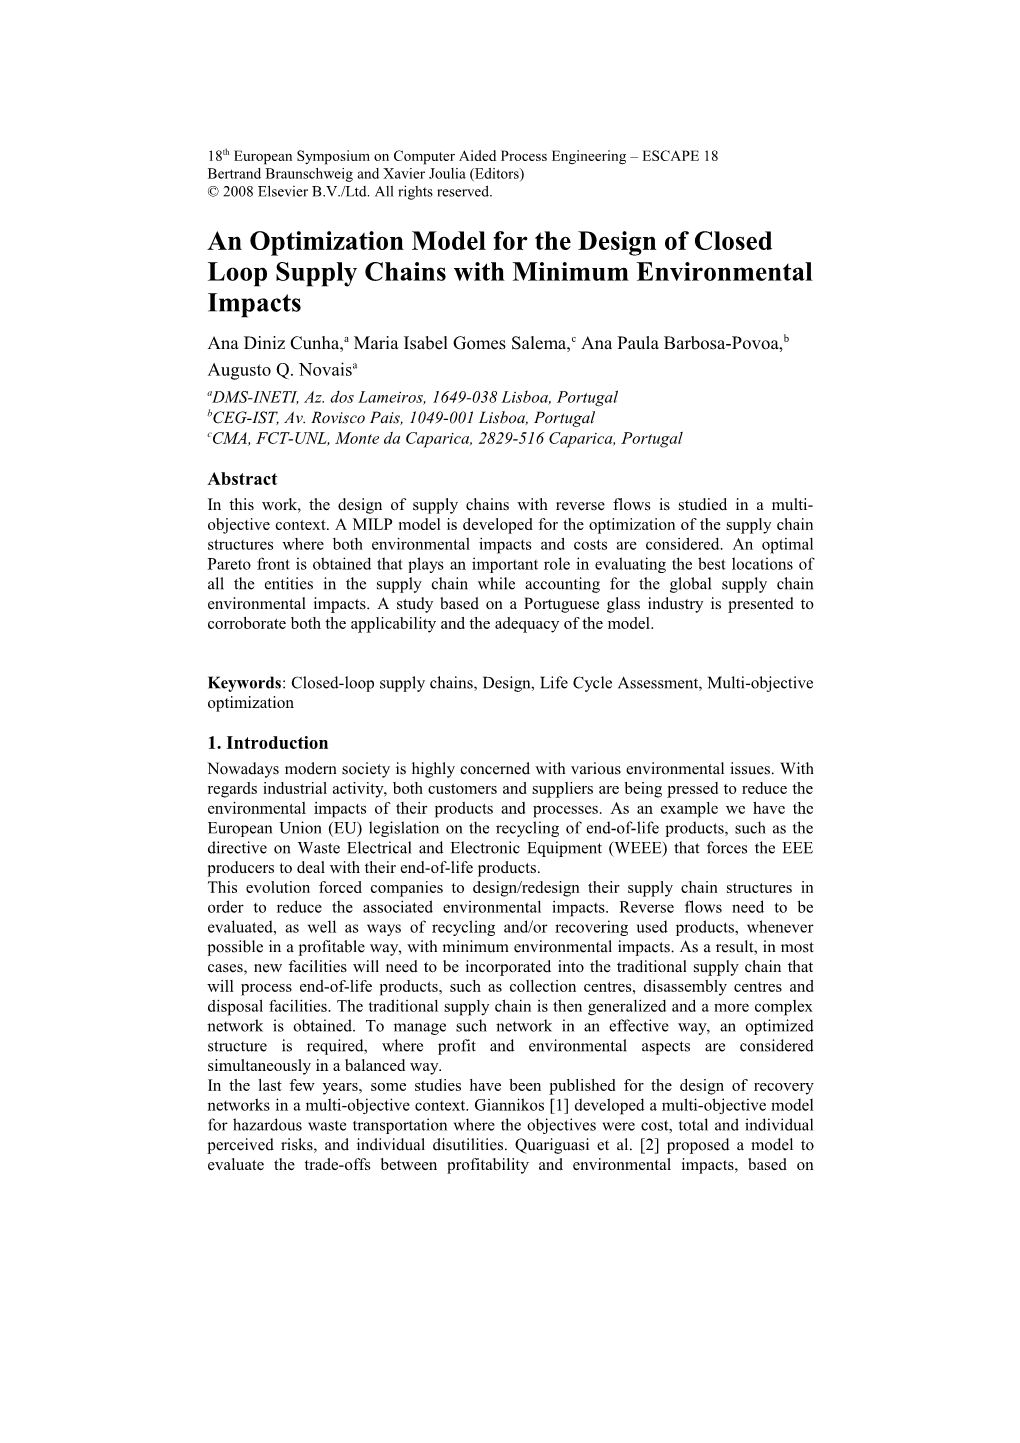 An Optimization Model for the Design of Closed Loop Supply Chains with Minimum Environmental